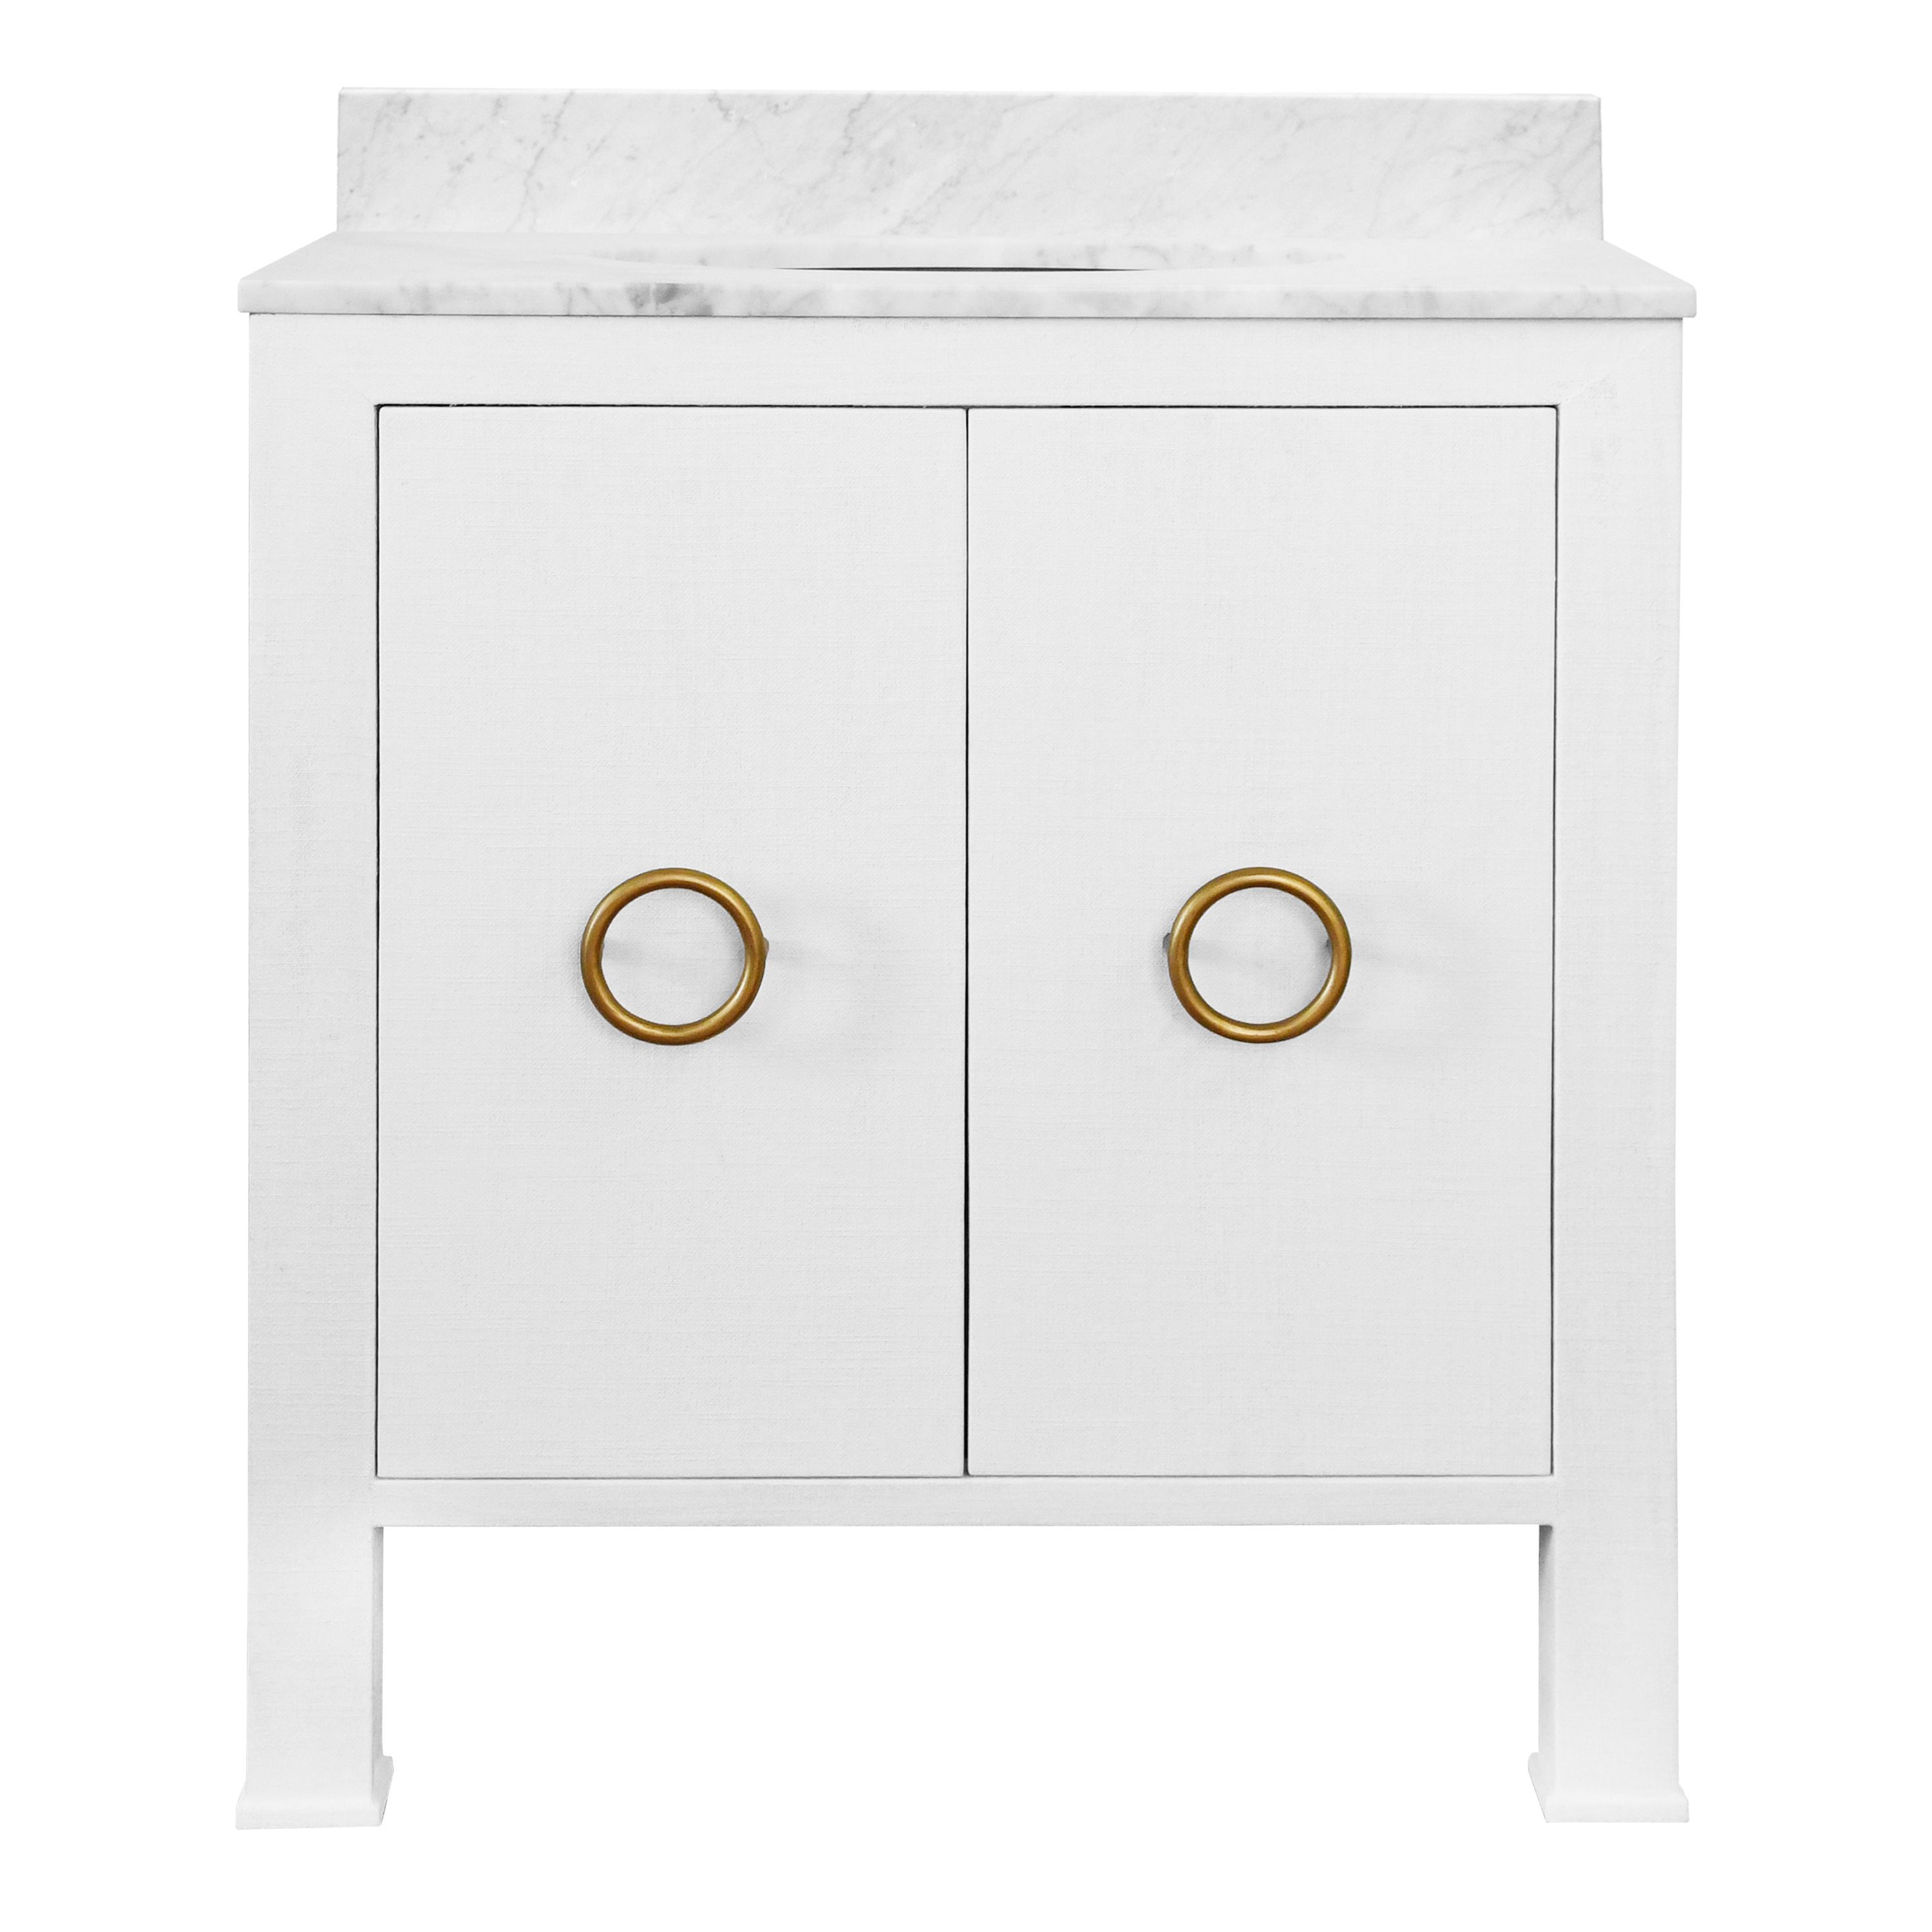 30" Issac Edwards Collection Bath Vanity in Textured White Linen w/ Antique Brass Hardware, White Marble Top and Porcelain Sink